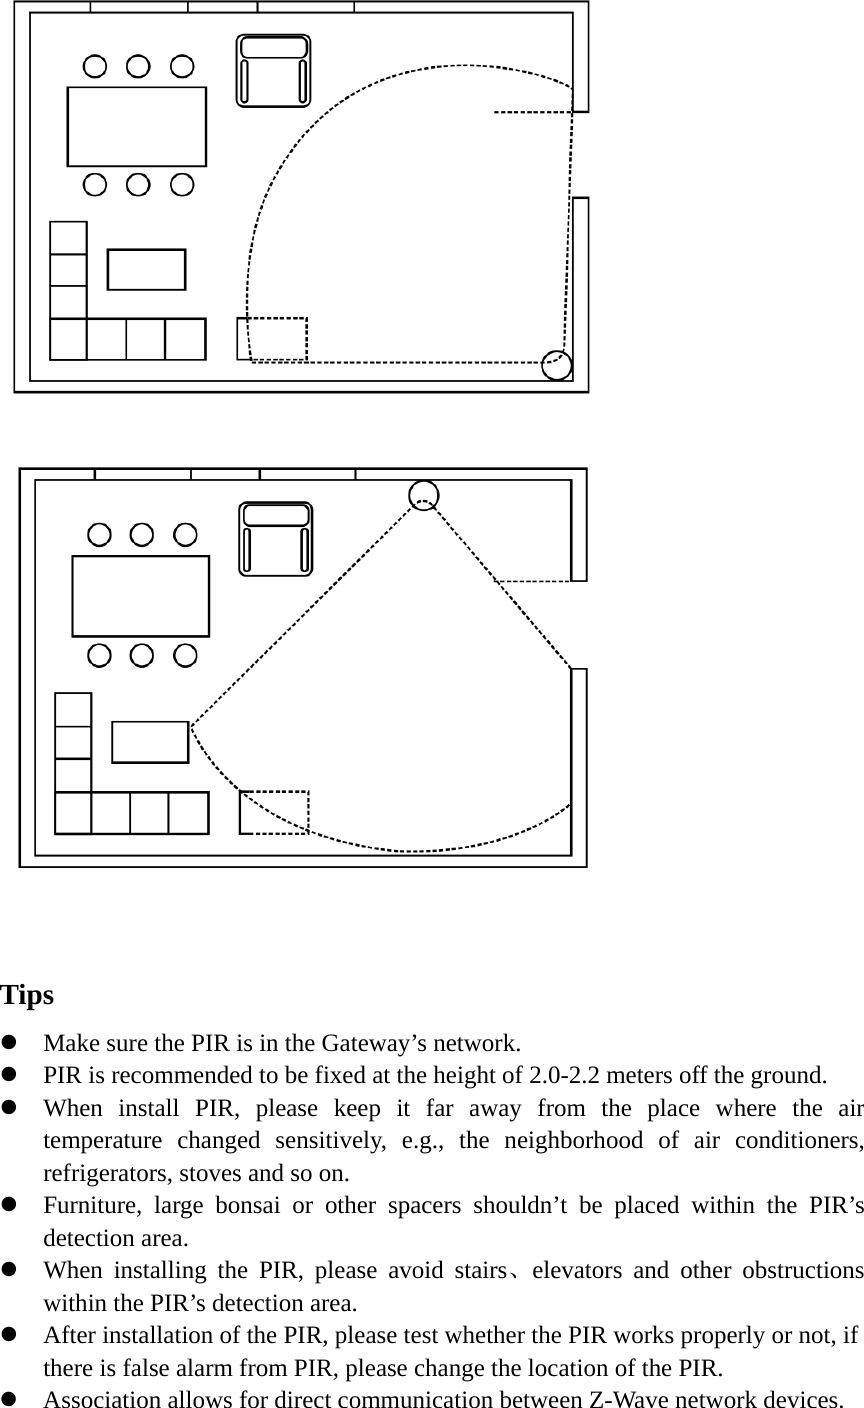        Tips  Make sure the PIR is in the Gateway’s network.  PIR is recommended to be fixed at the height of 2.0-2.2 meters off the ground.  When install PIR, please keep it far away from the place where the air temperature changed sensitively, e.g., the neighborhood of air conditioners, refrigerators, stoves and so on.  Furniture, large bonsai or other spacers shouldn’t be placed within the PIR’s detection area.  When installing the PIR, please avoid stairs、elevators and other obstructions within the PIR’s detection area.  After installation of the PIR, please test whether the PIR works properly or not, if there is false alarm from PIR, please change the location of the PIR.    Association allows for direct communication between Z-Wave network devices. 